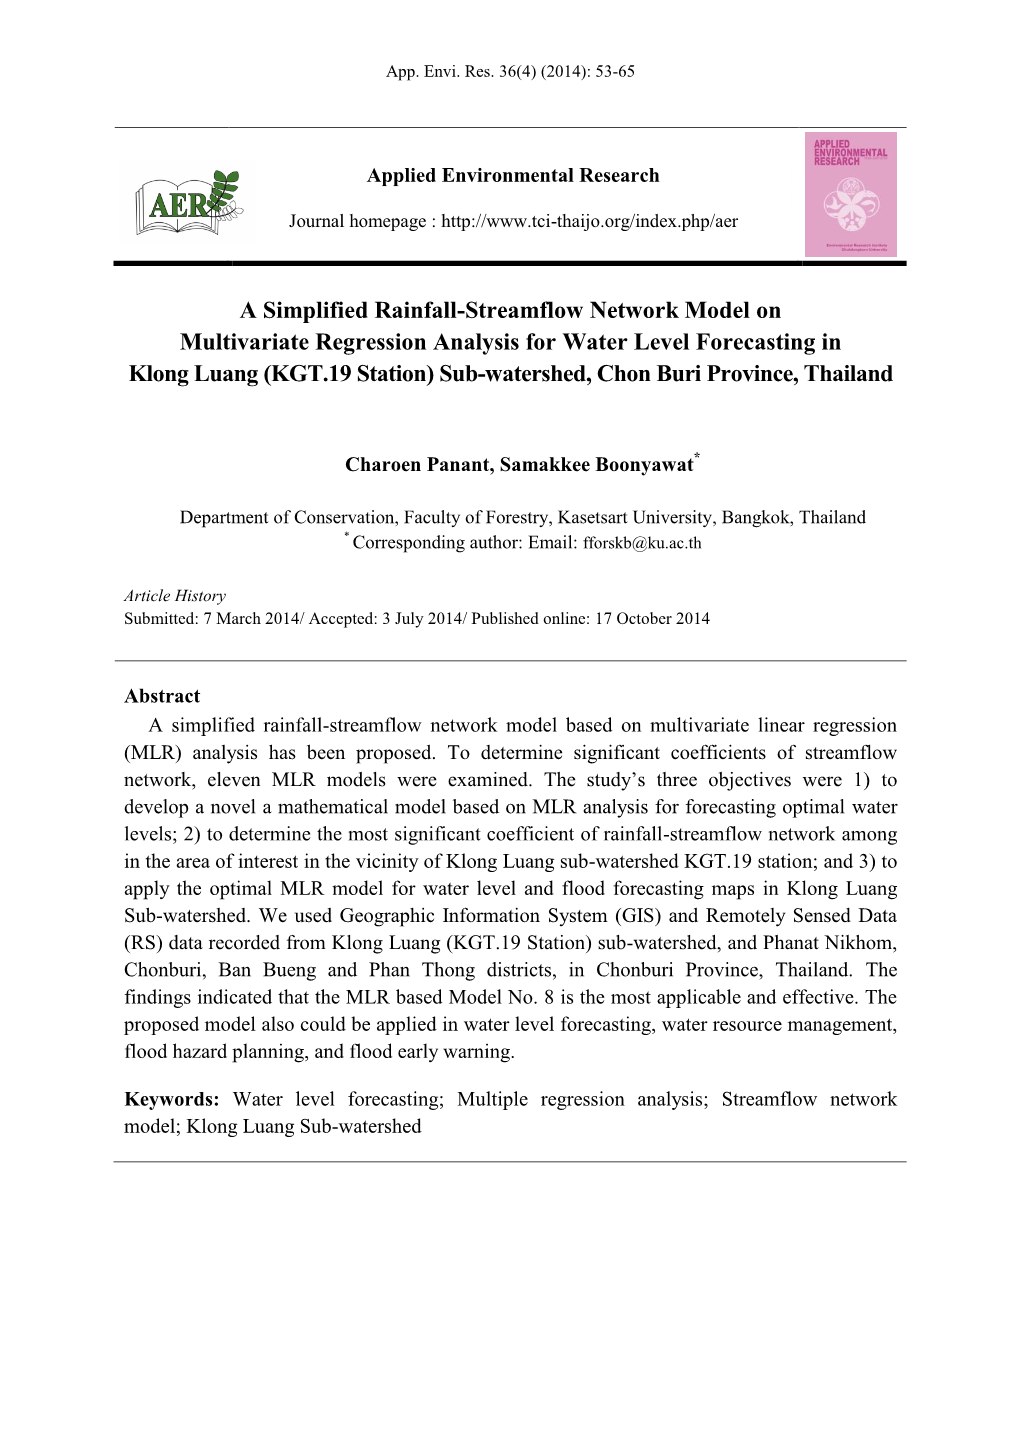 A Simplified Rainfall-Streamflow Network Model on Multivariate Regression Analysis for Water Level Forecasting in Klong Luang